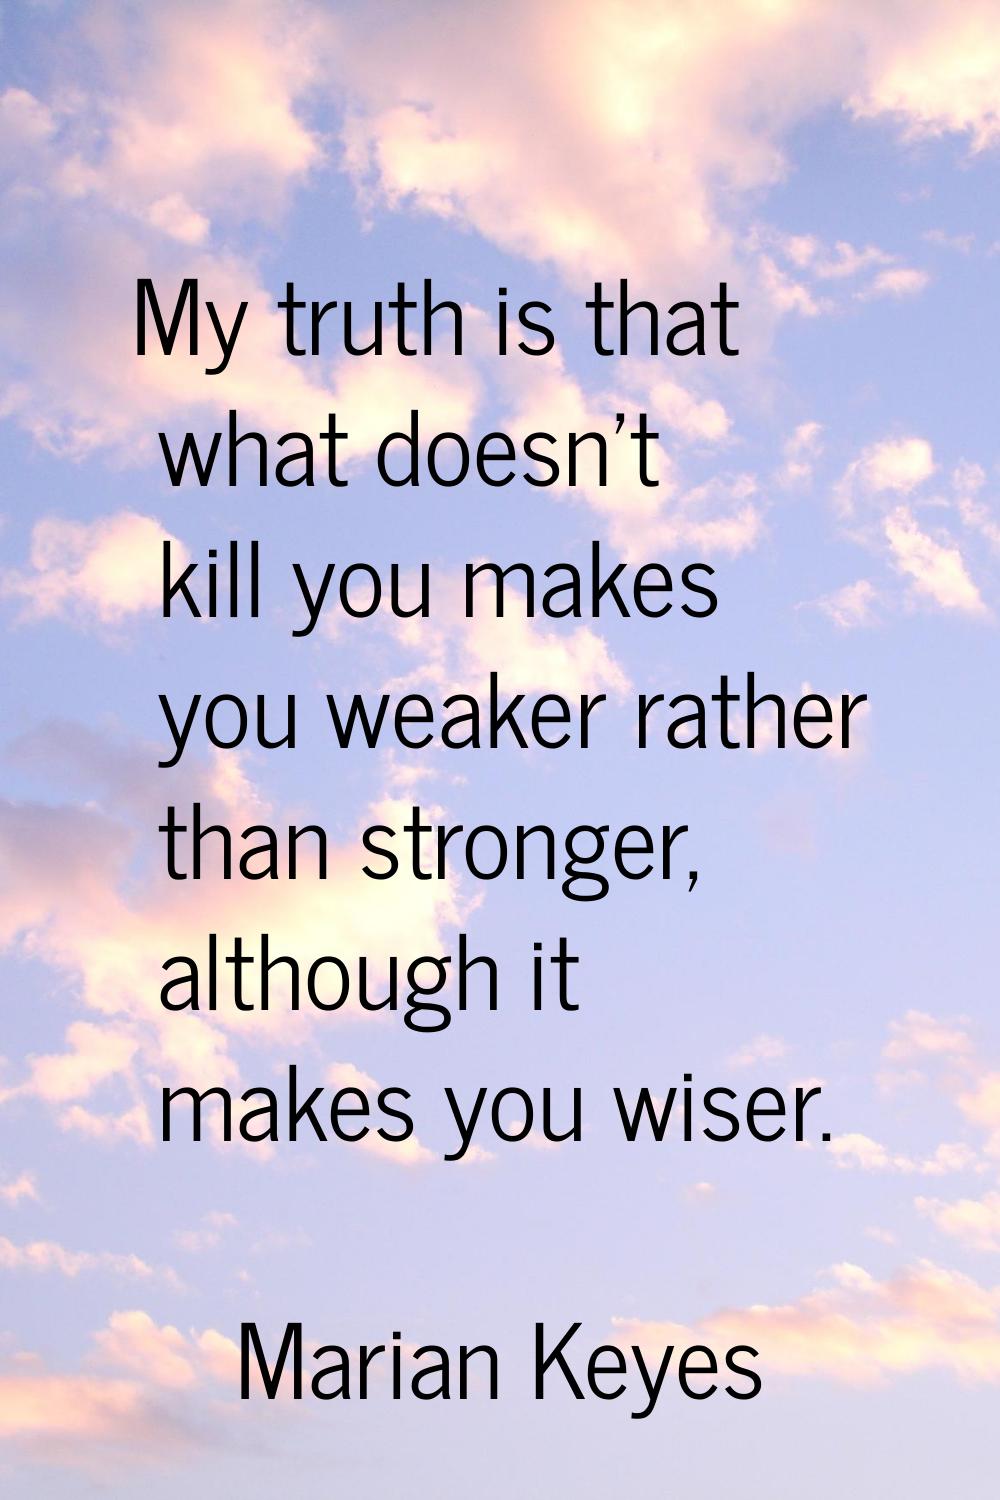 My truth is that what doesn't kill you makes you weaker rather than stronger, although it makes you